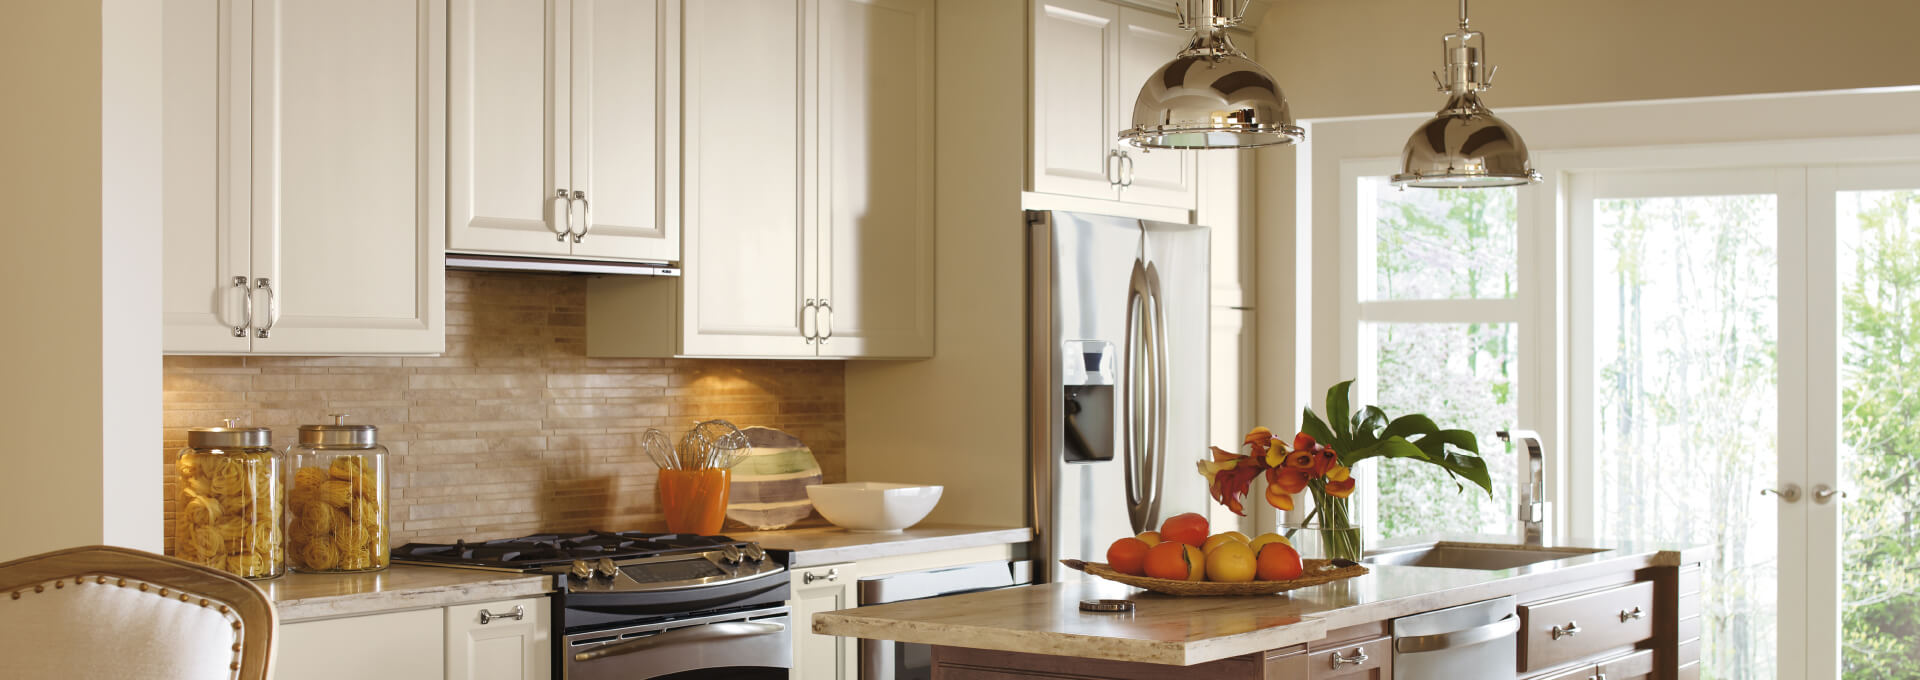 Syracuse Kitchen Design Only Service, Countertops And Cabinets Syracuse Ny